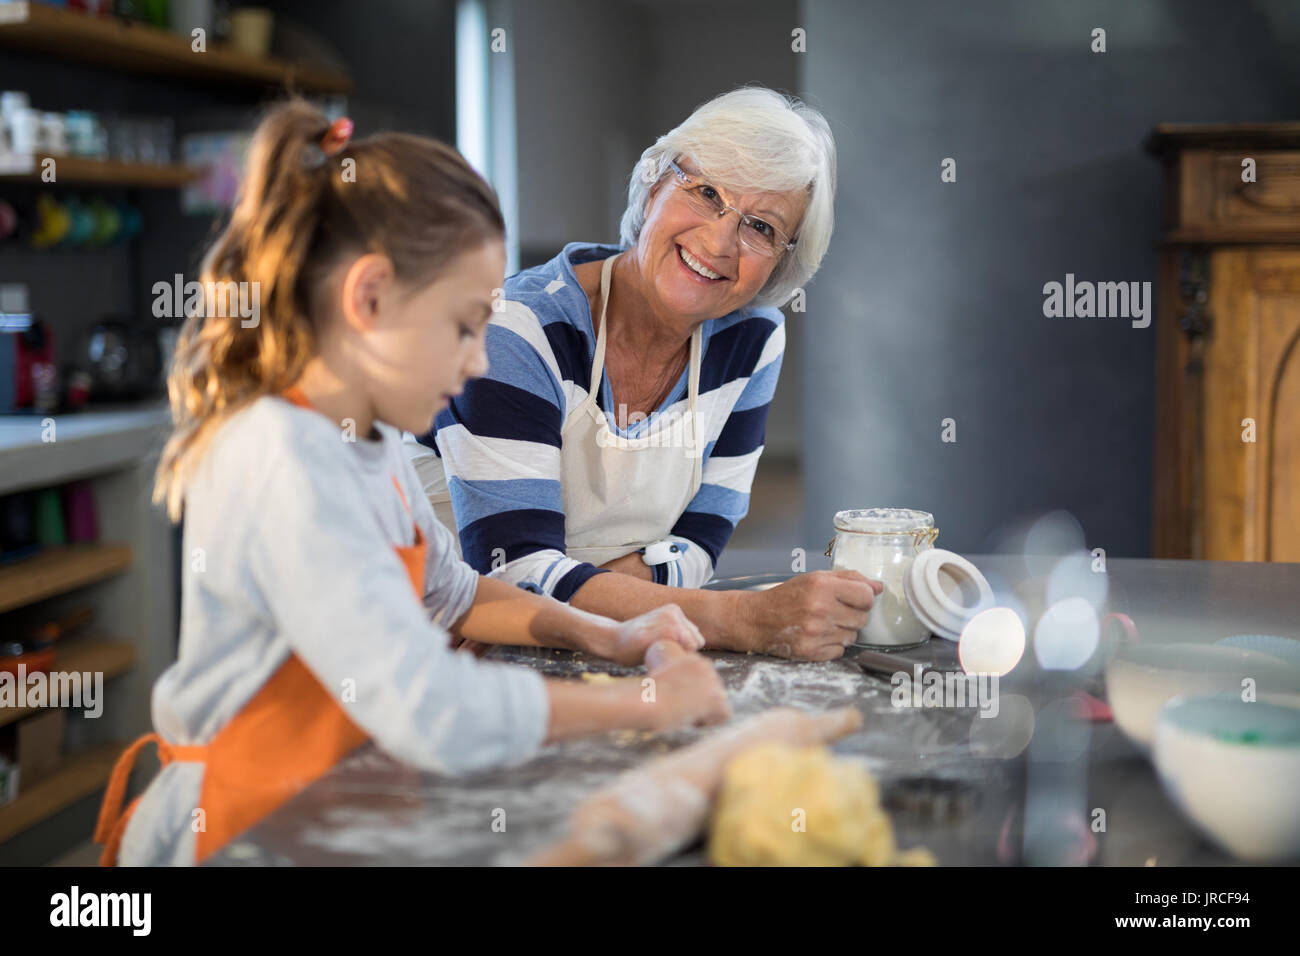 Granddaughter flattening dough with grandmother in the kitchen Stock Photo